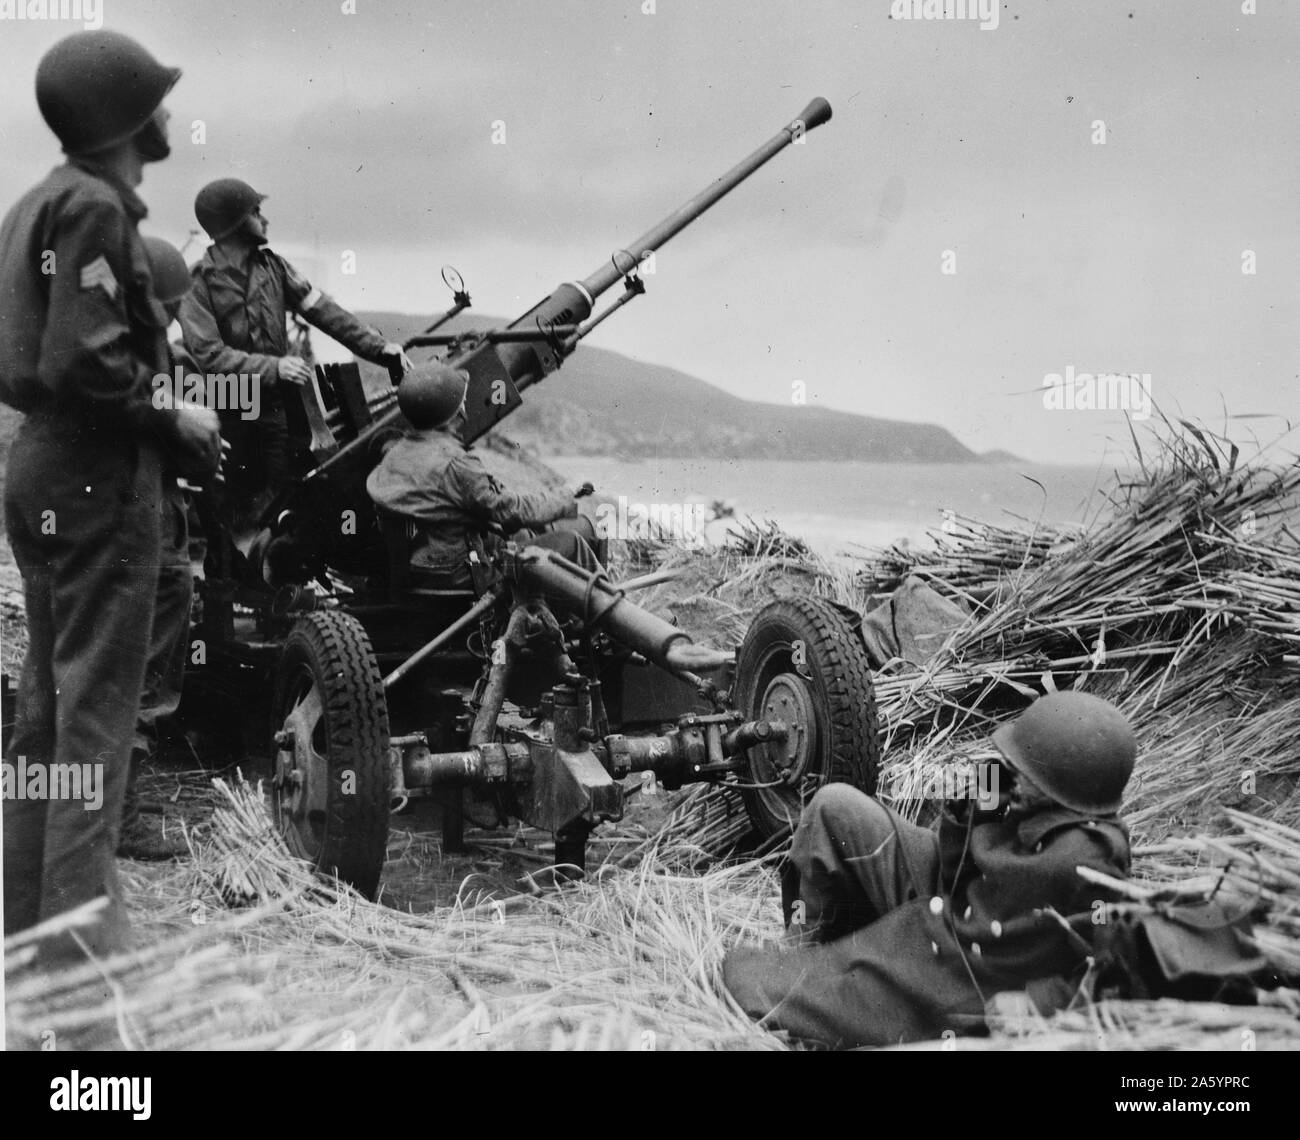 Anti-aircraft bofors gun in at position on a mound overlooking the beach in Algeria with a United States anti-aircraft artillery crew in position. 1943. Stock Photo